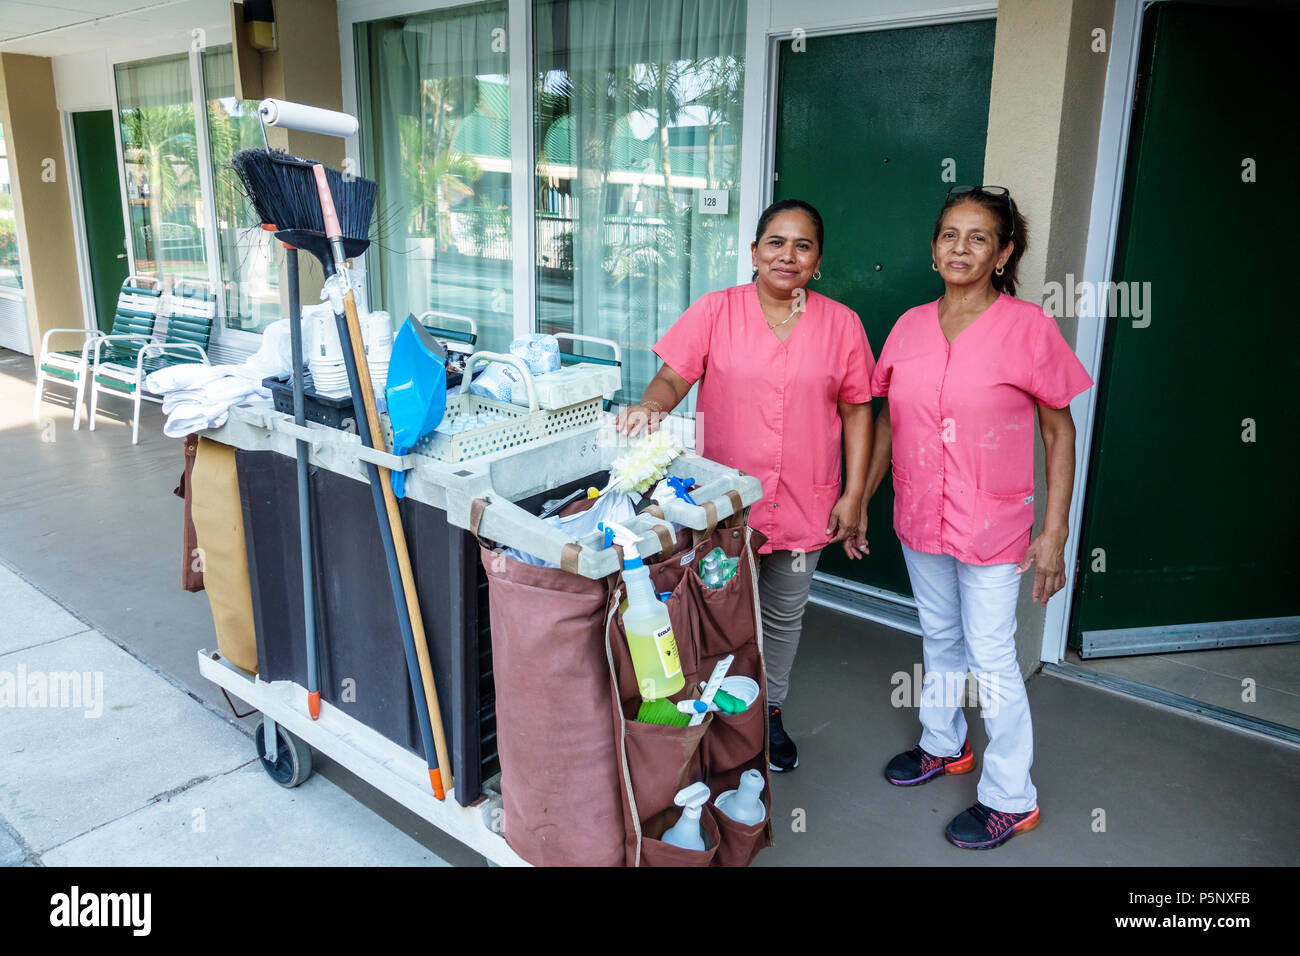 Housekeeping staff cleaning towels at Days Inn in Port Charlotte